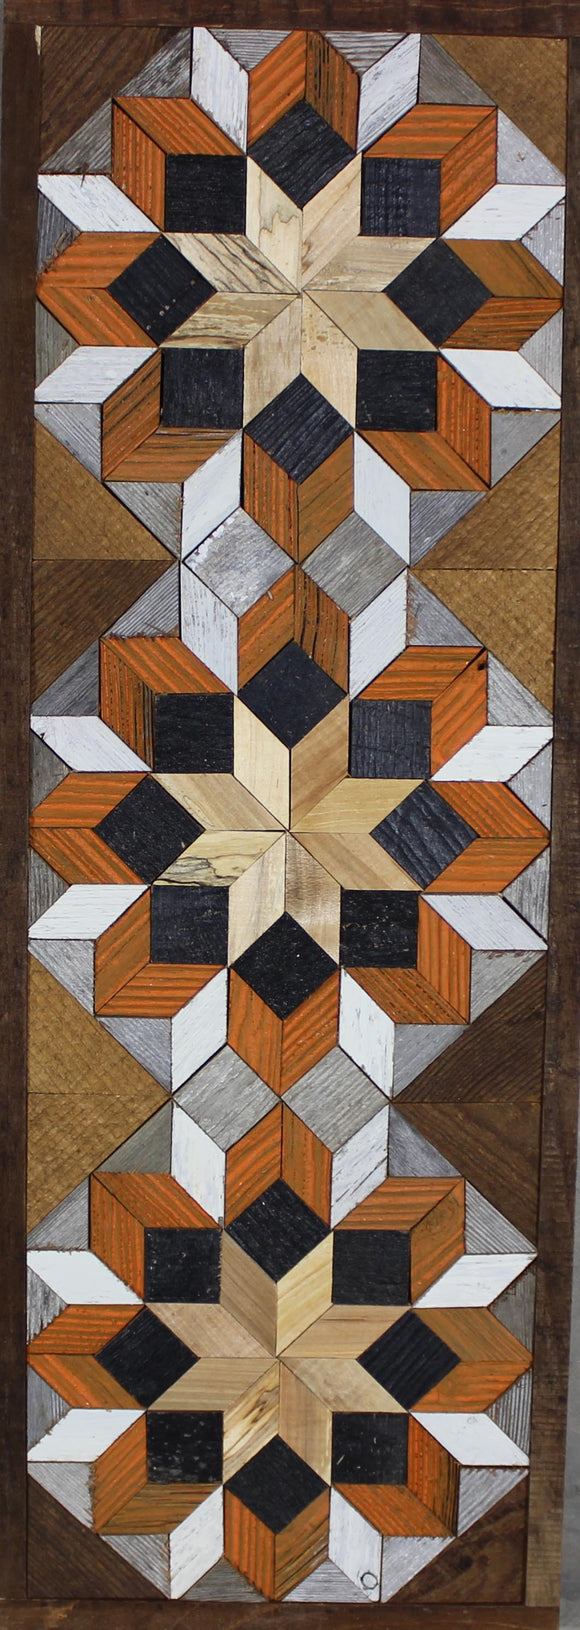 Amish Barn Quilt Wall Art, 30 by 10.5 Burnt Orange and Black Flower